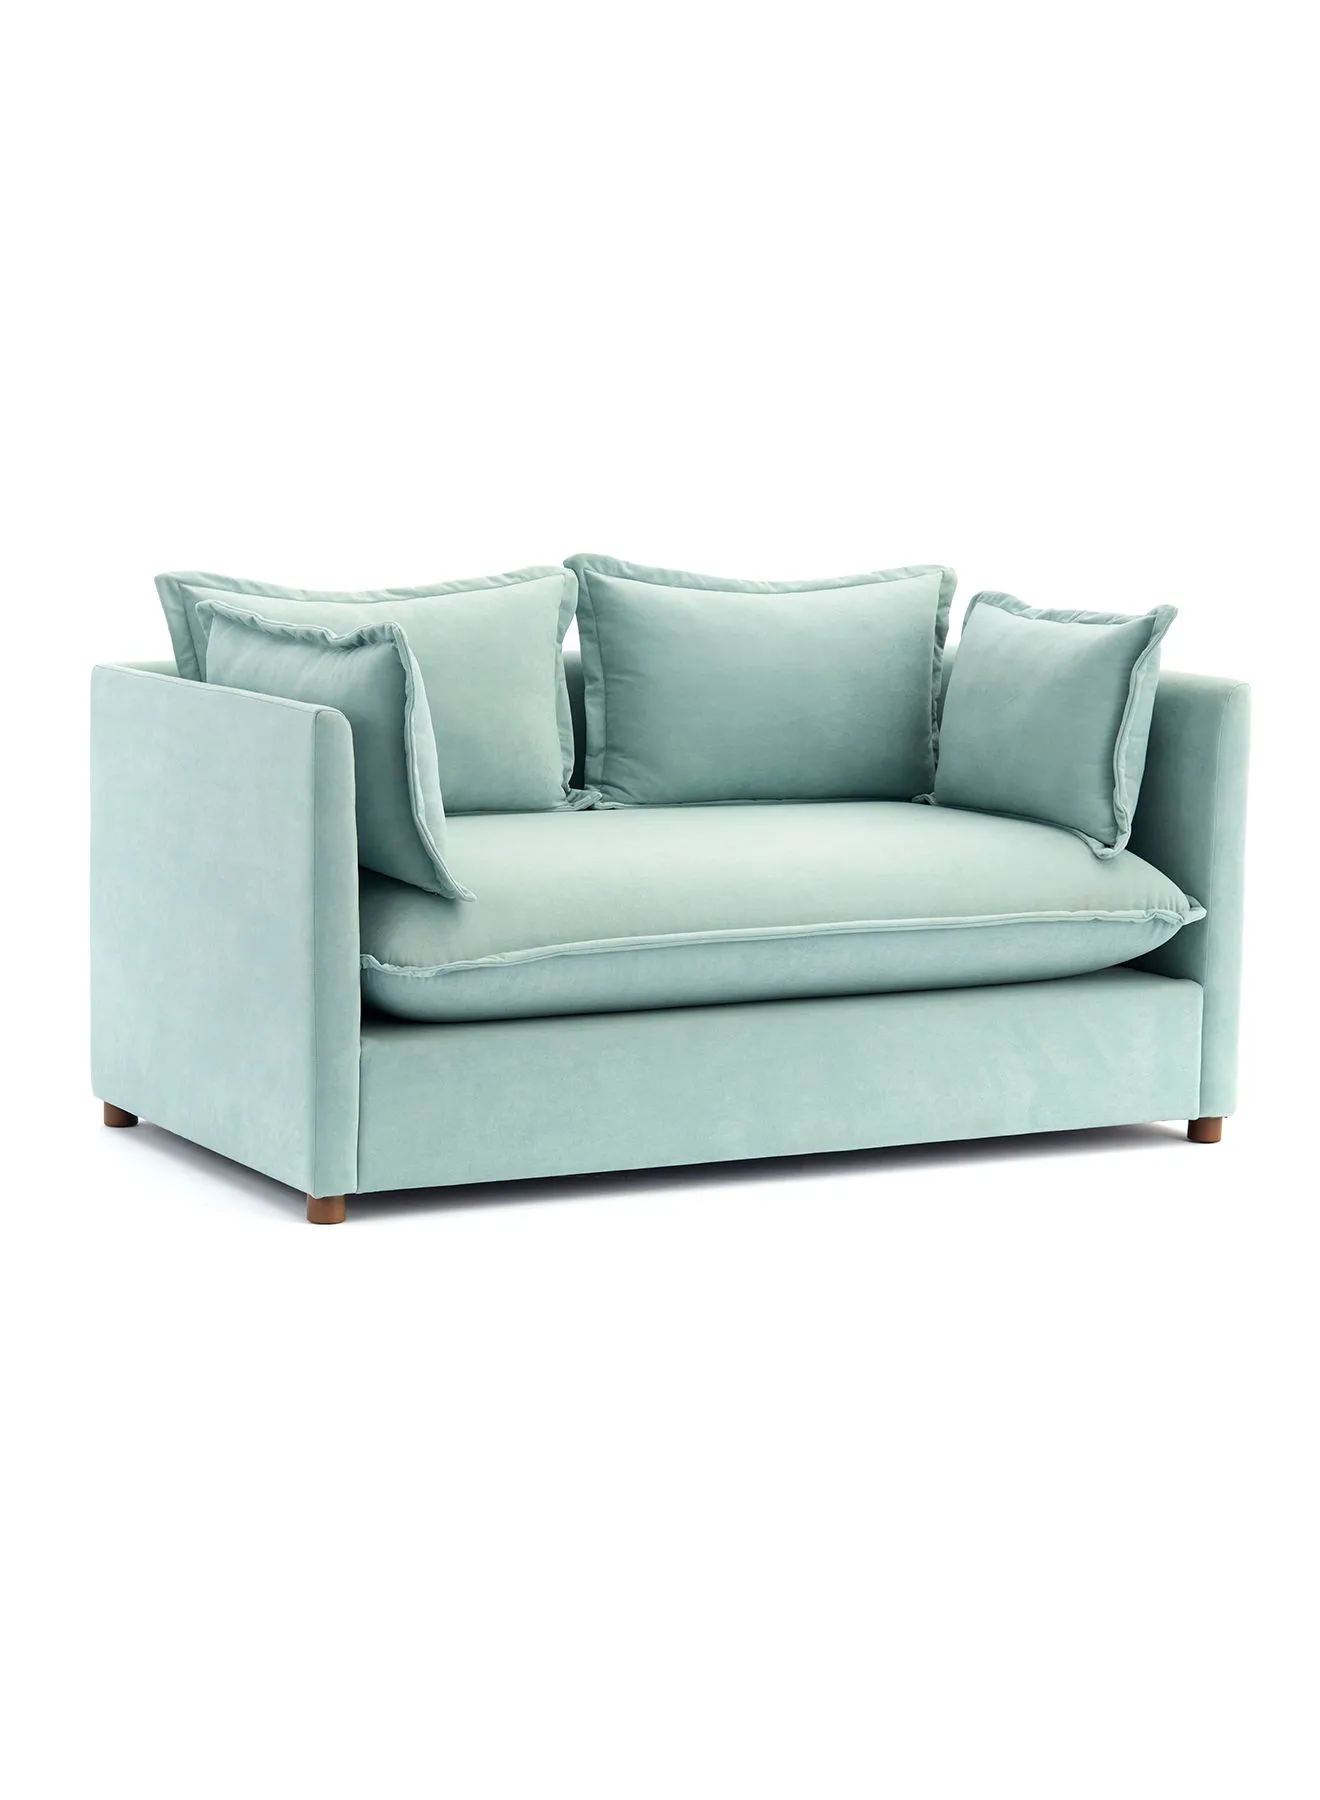 ebb & flow Sofa Luxurious - Blue Wood Couch - 1770 X 990 X 693 - 2 Seater Sofa Relaxing Sofa